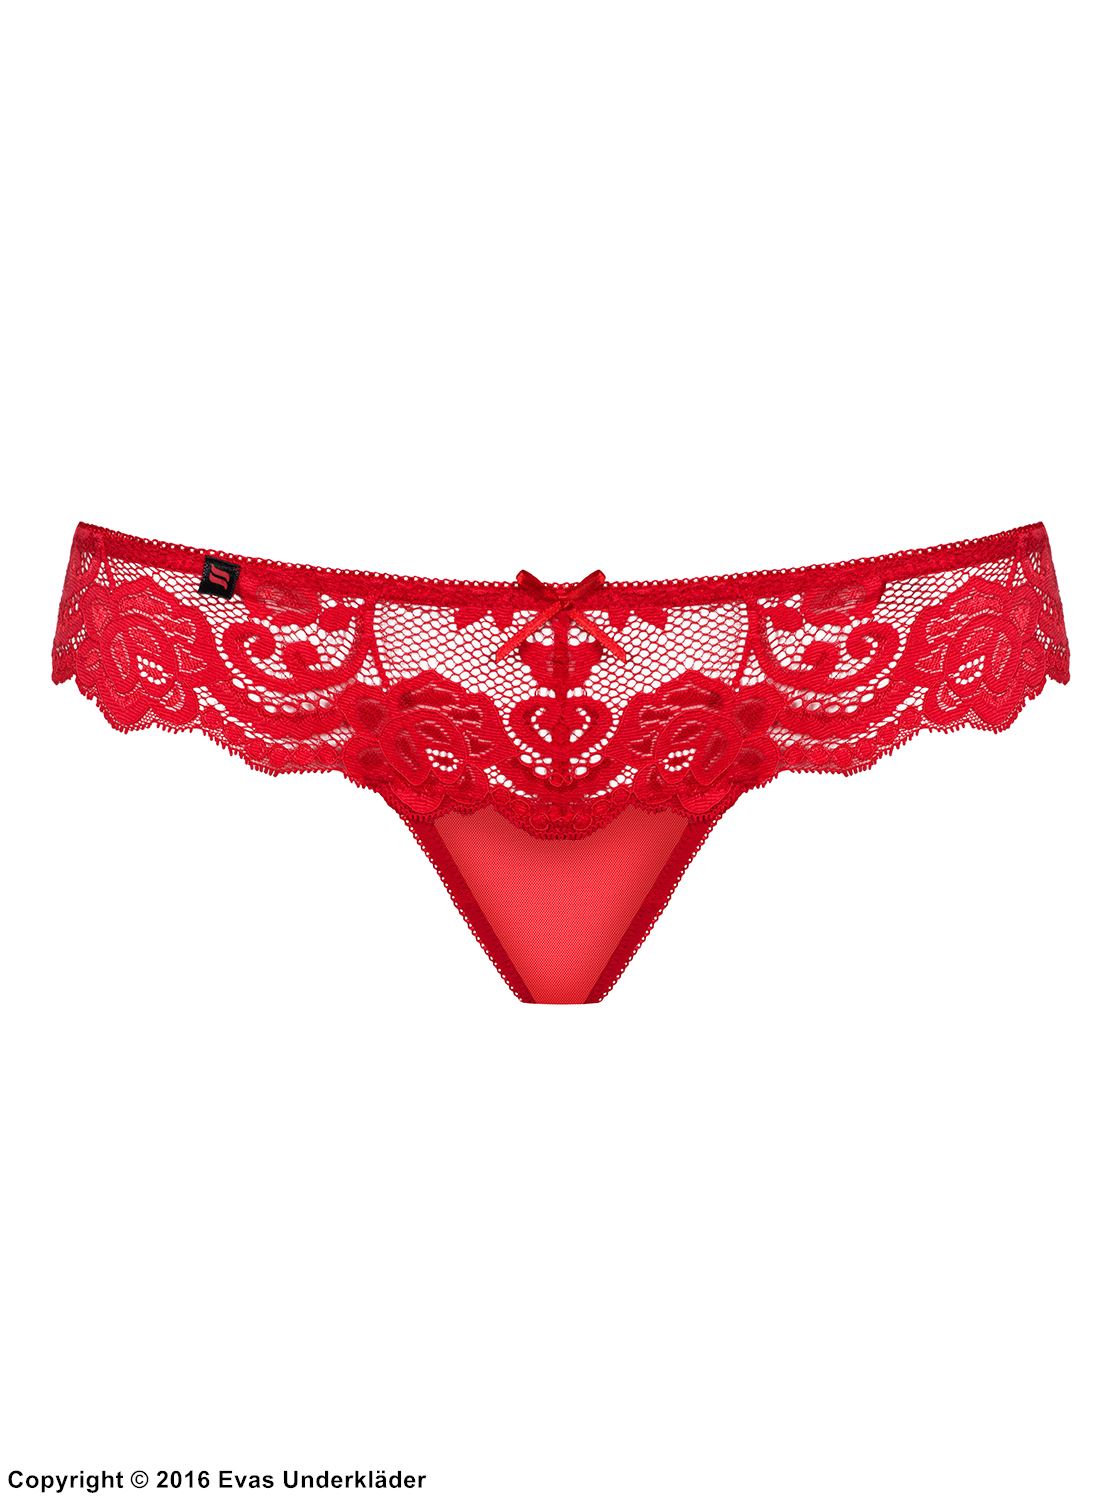 Romantic thong, floral lace, rhinestone heart